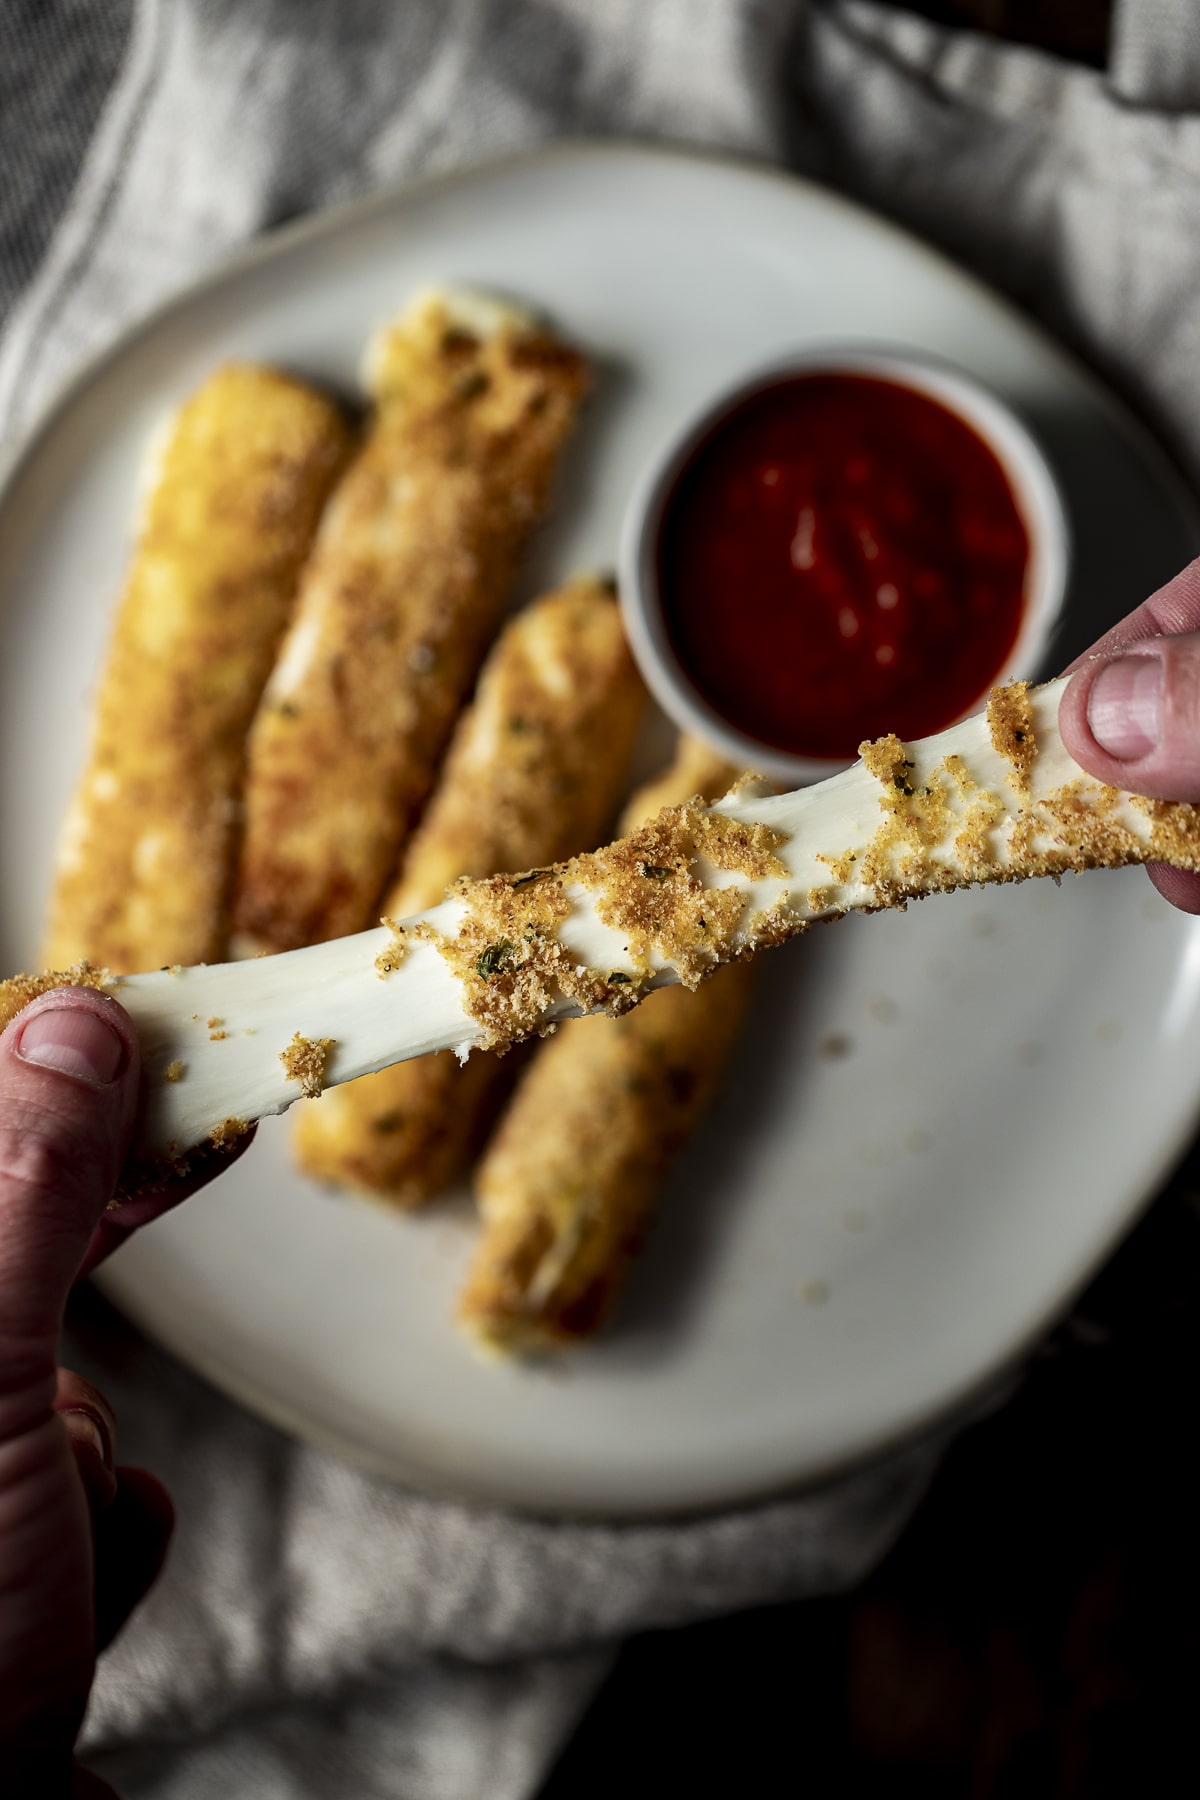 Close up view of a mozzarella stick being pulled apart to expose the stretchy cheese.